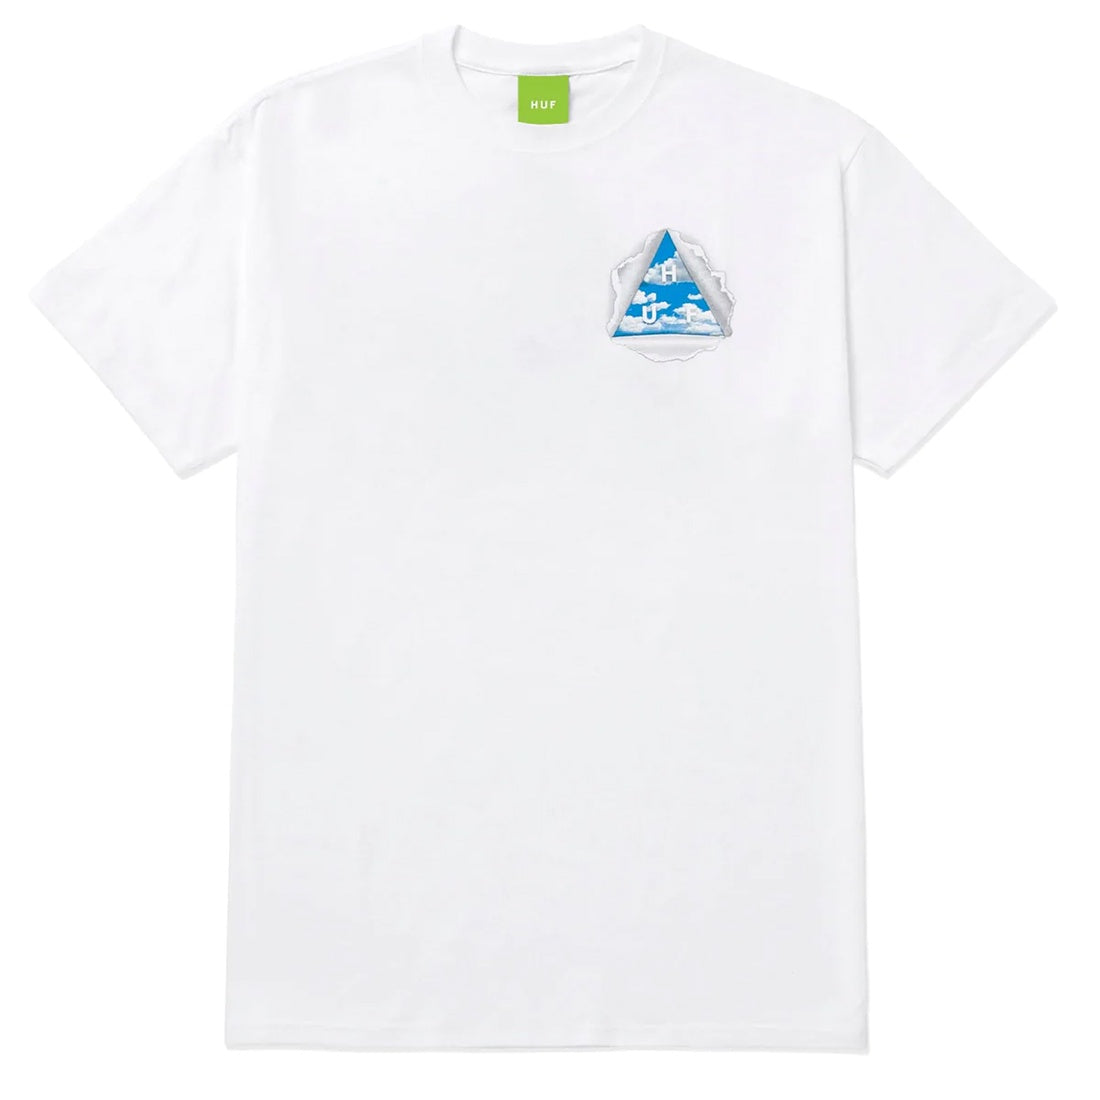 Tear A New One S/S Tee White